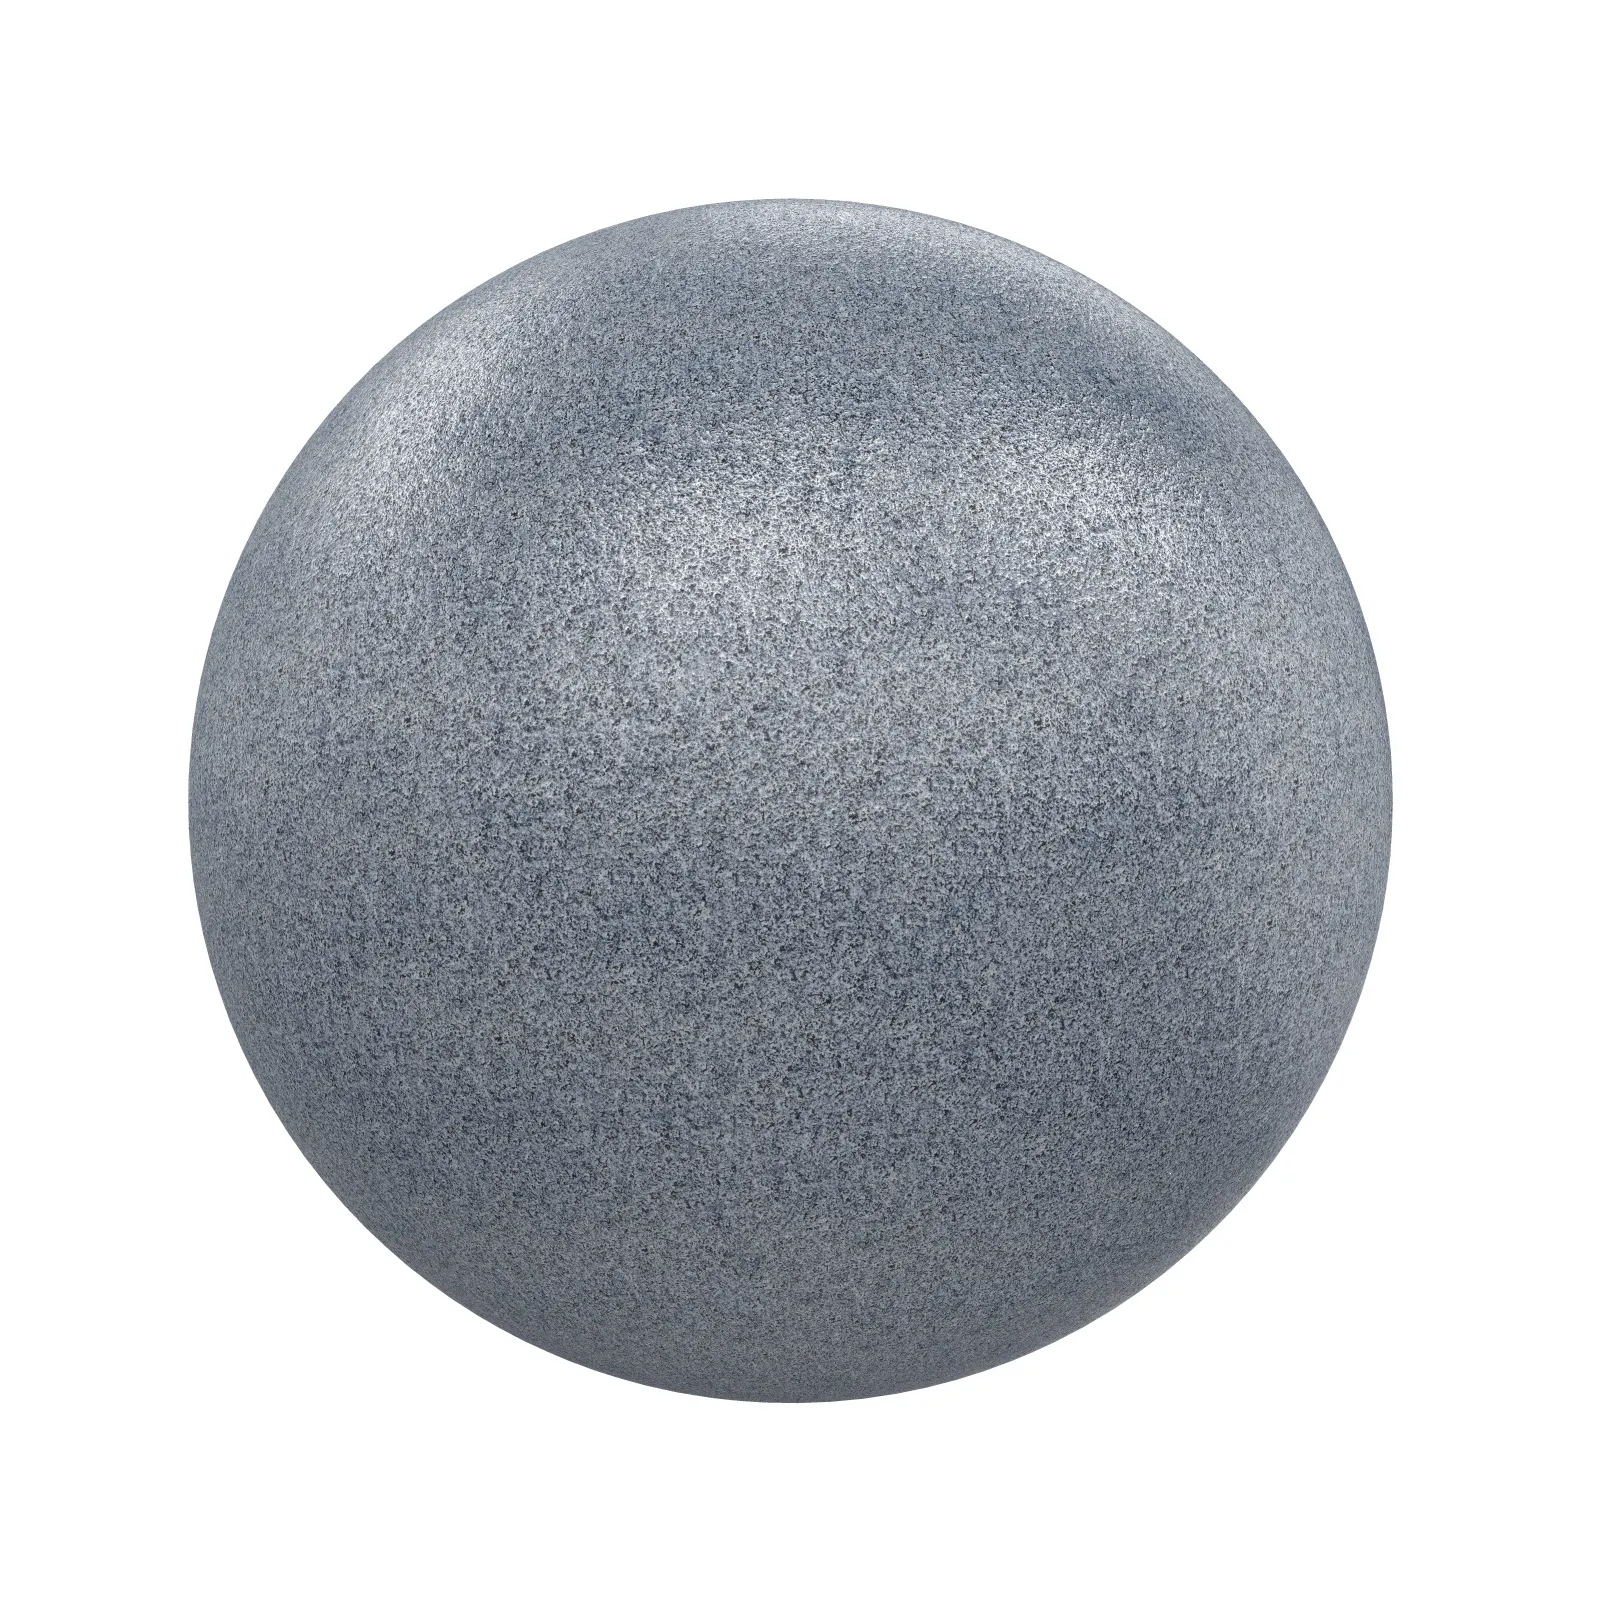 TEXTURES – STONES – CGAxis PBR Colection Vol 1 Stones – grey shiny stone